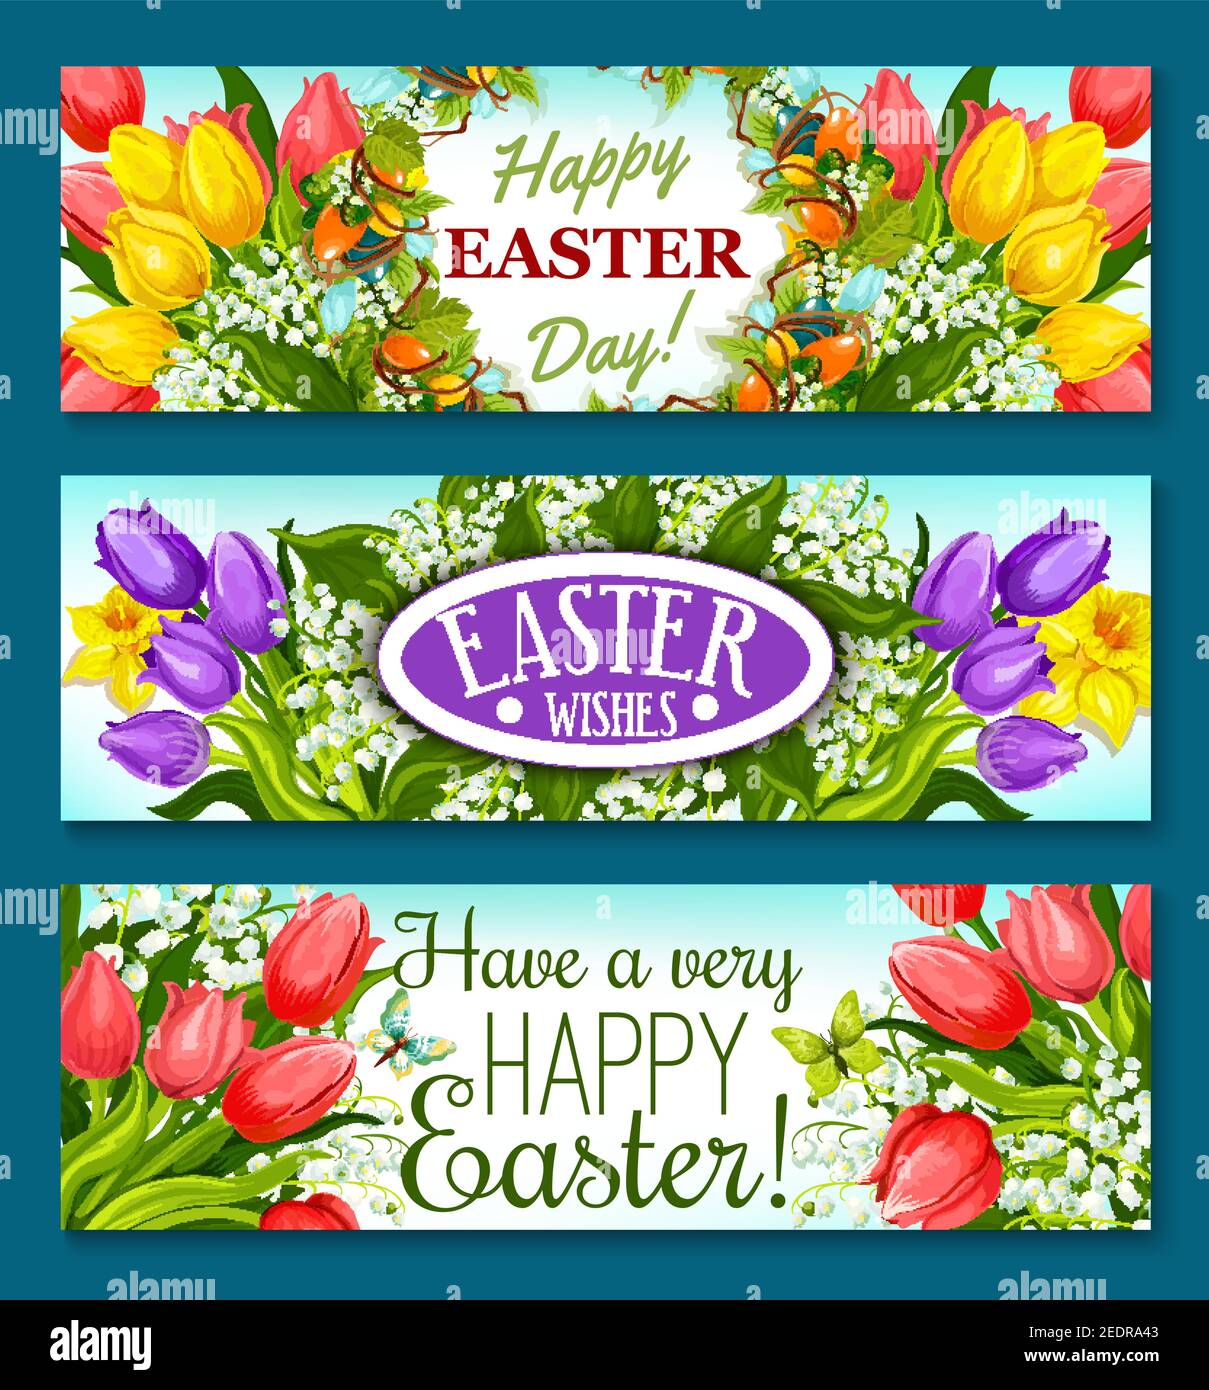 Easter greetings floral banner set. Easter egg and spring flower wreath of tulip, narcissus and lily of the valley flowers, green leaves and grapevine Stock Vector